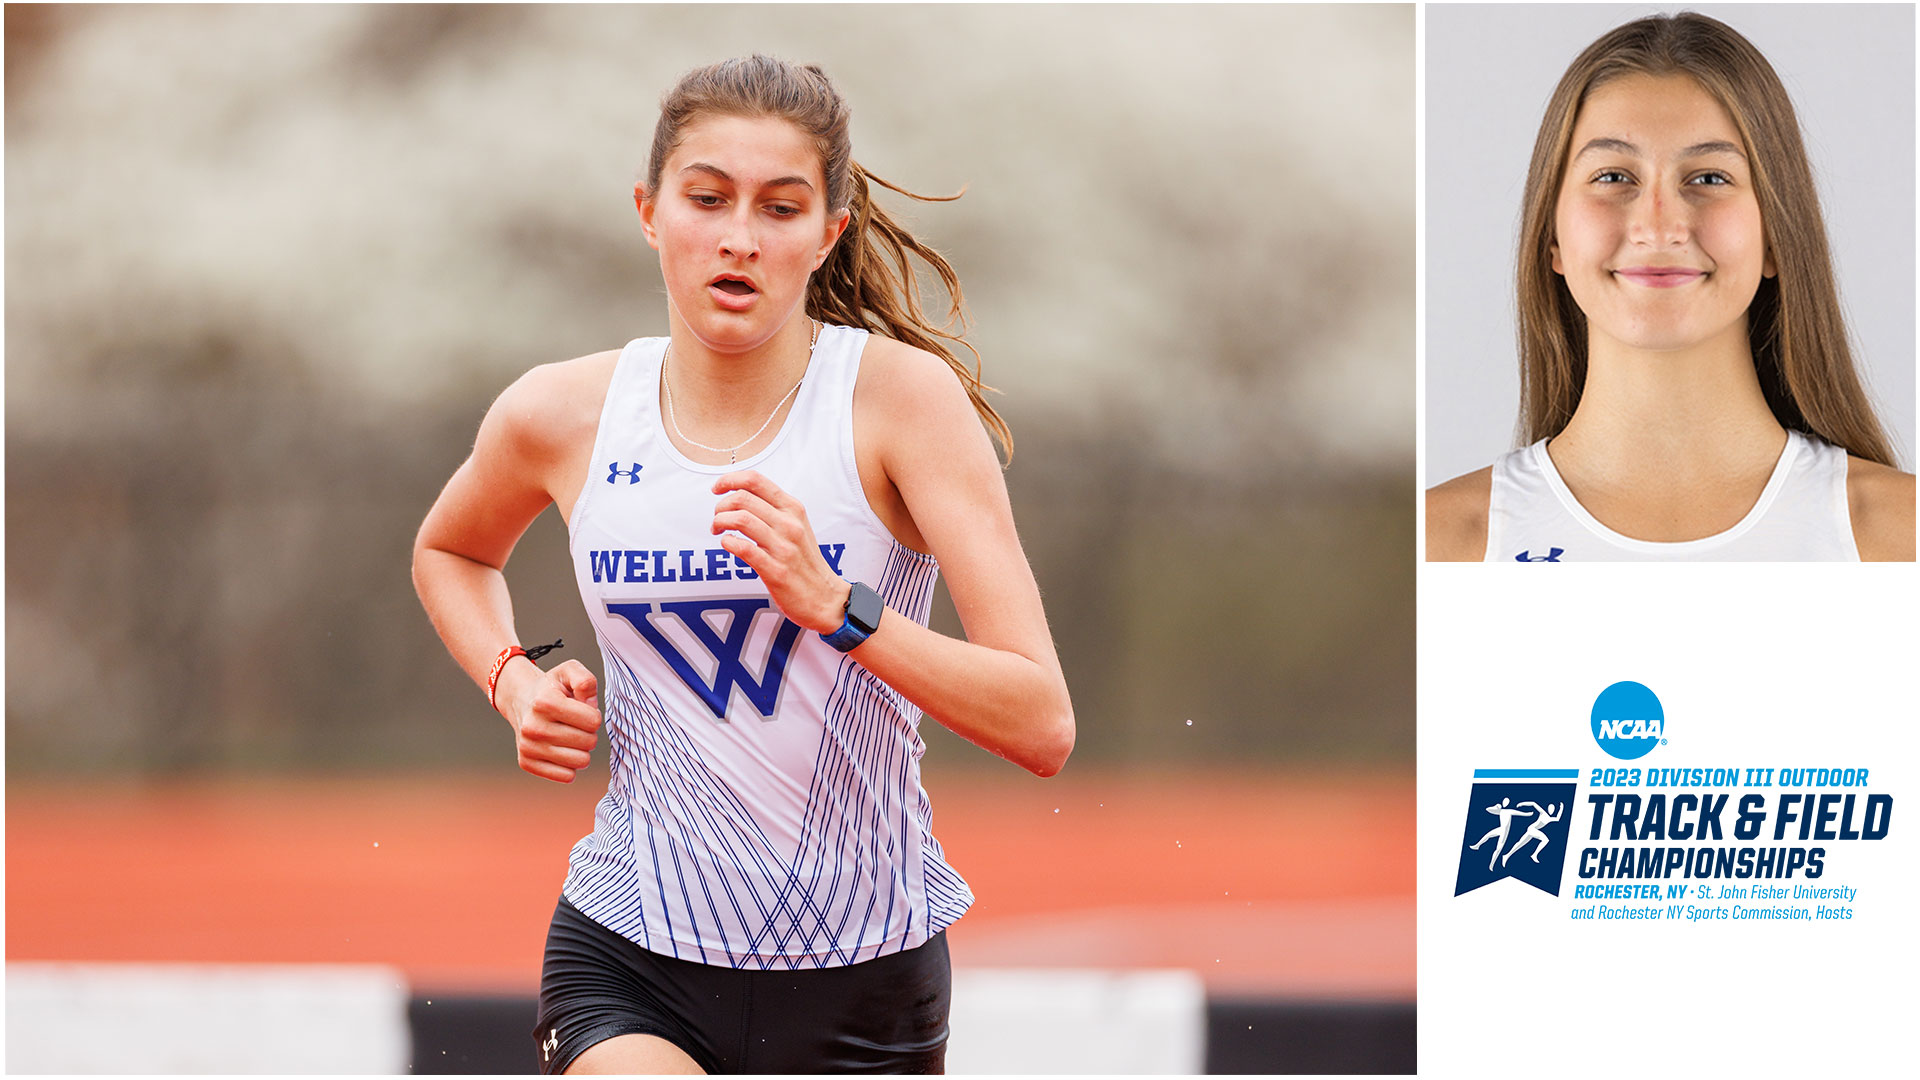 Ella Whinney '26 will represent Wellesley track & field in the 3000m steeplechase at the 2023 NCAA Division III Outdoor Track & Field Championships (Frank Poulin)